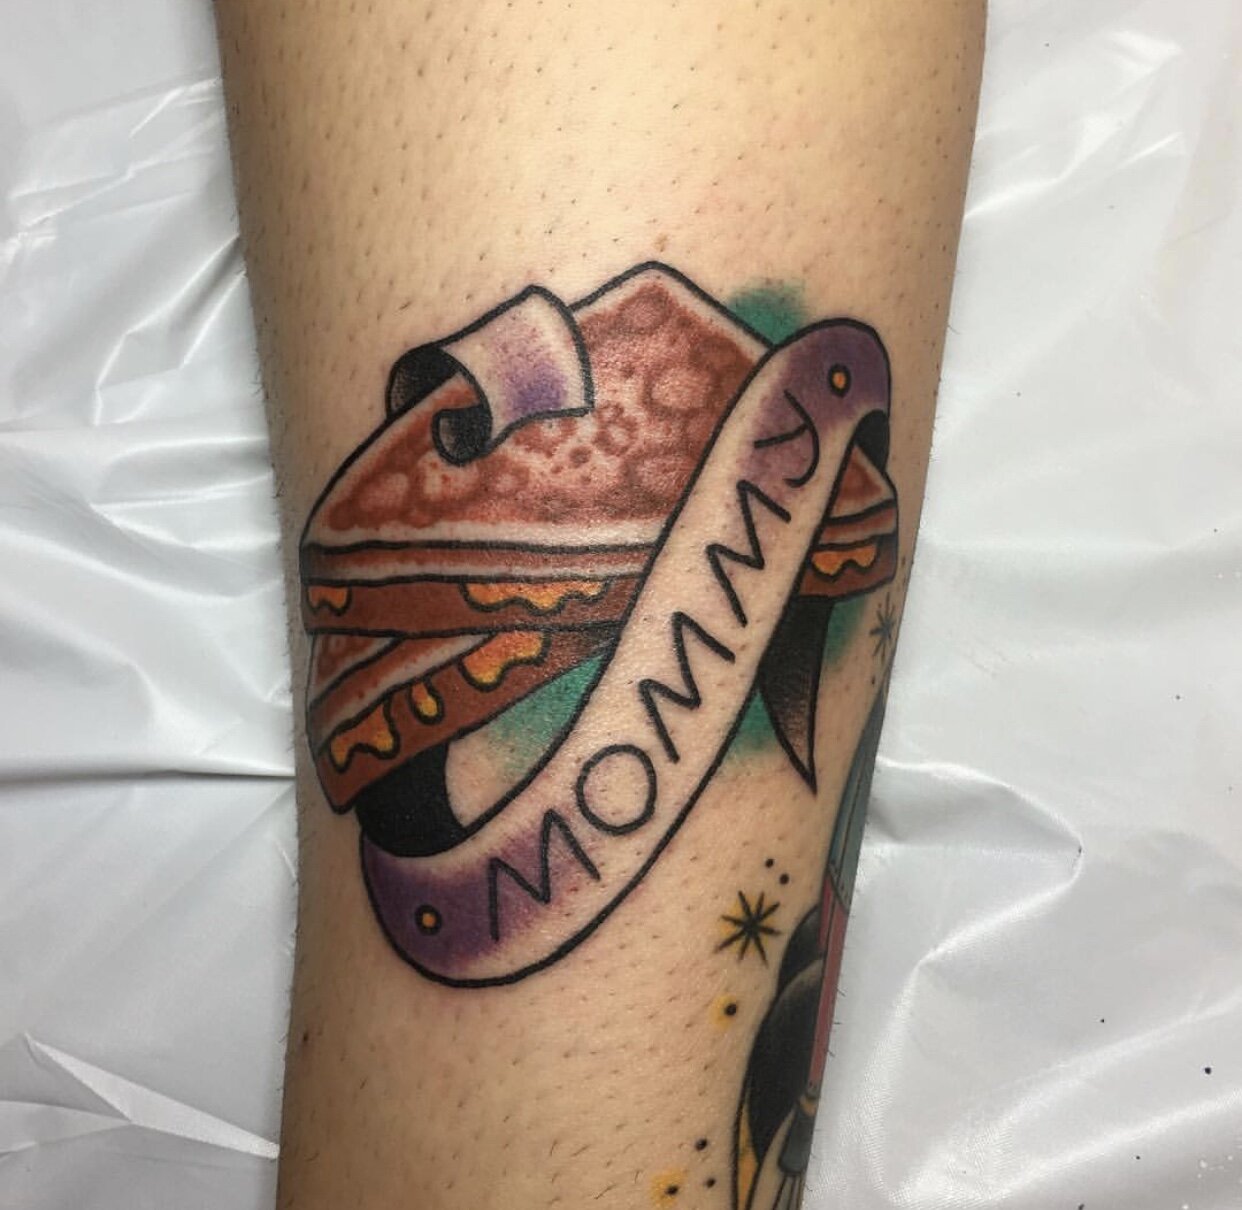 Grilled cheese tattoo with banner by Andrew Patch at Southern Star Tattoo in Atlanta, Georgia.